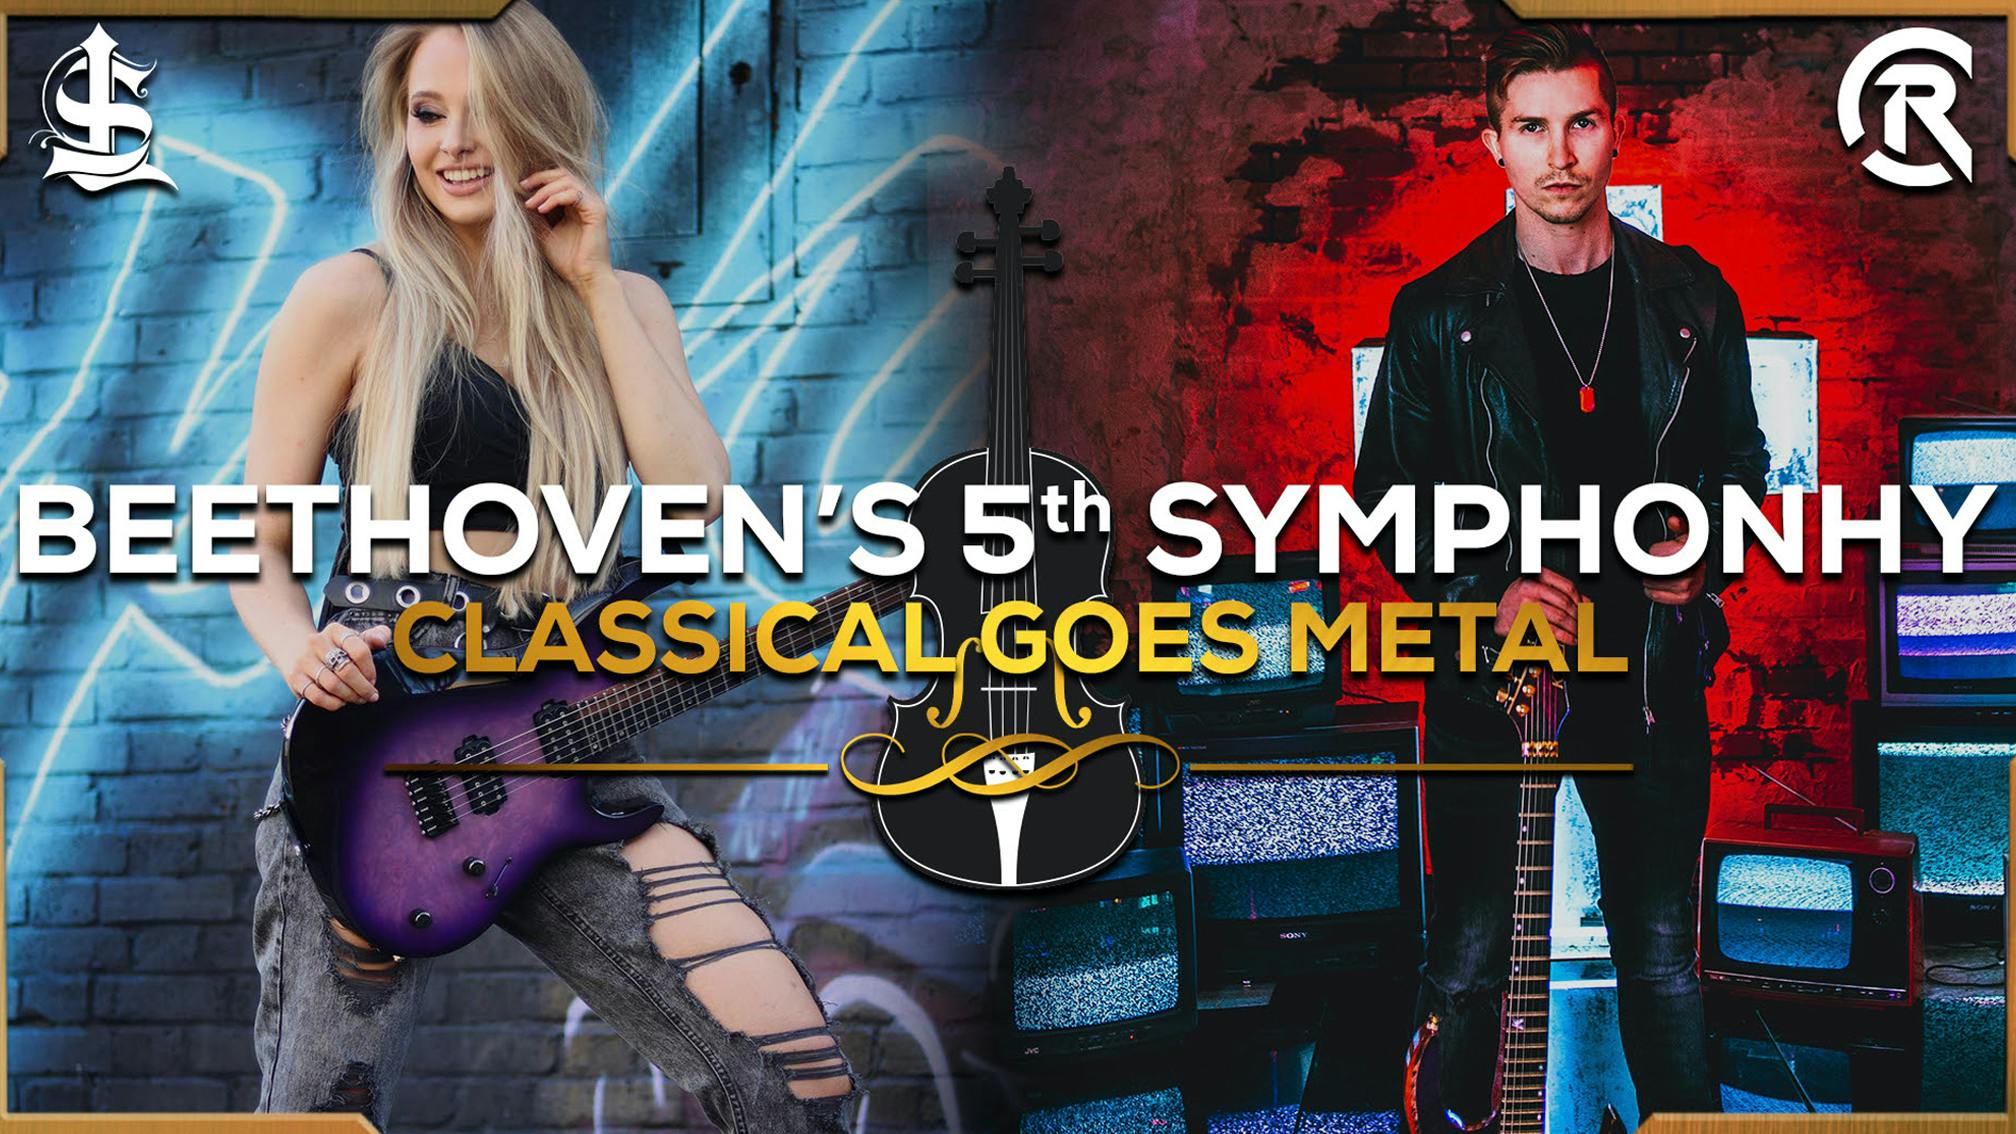 This metal cover of Beethoven's 5th Symphony absolutely crushes